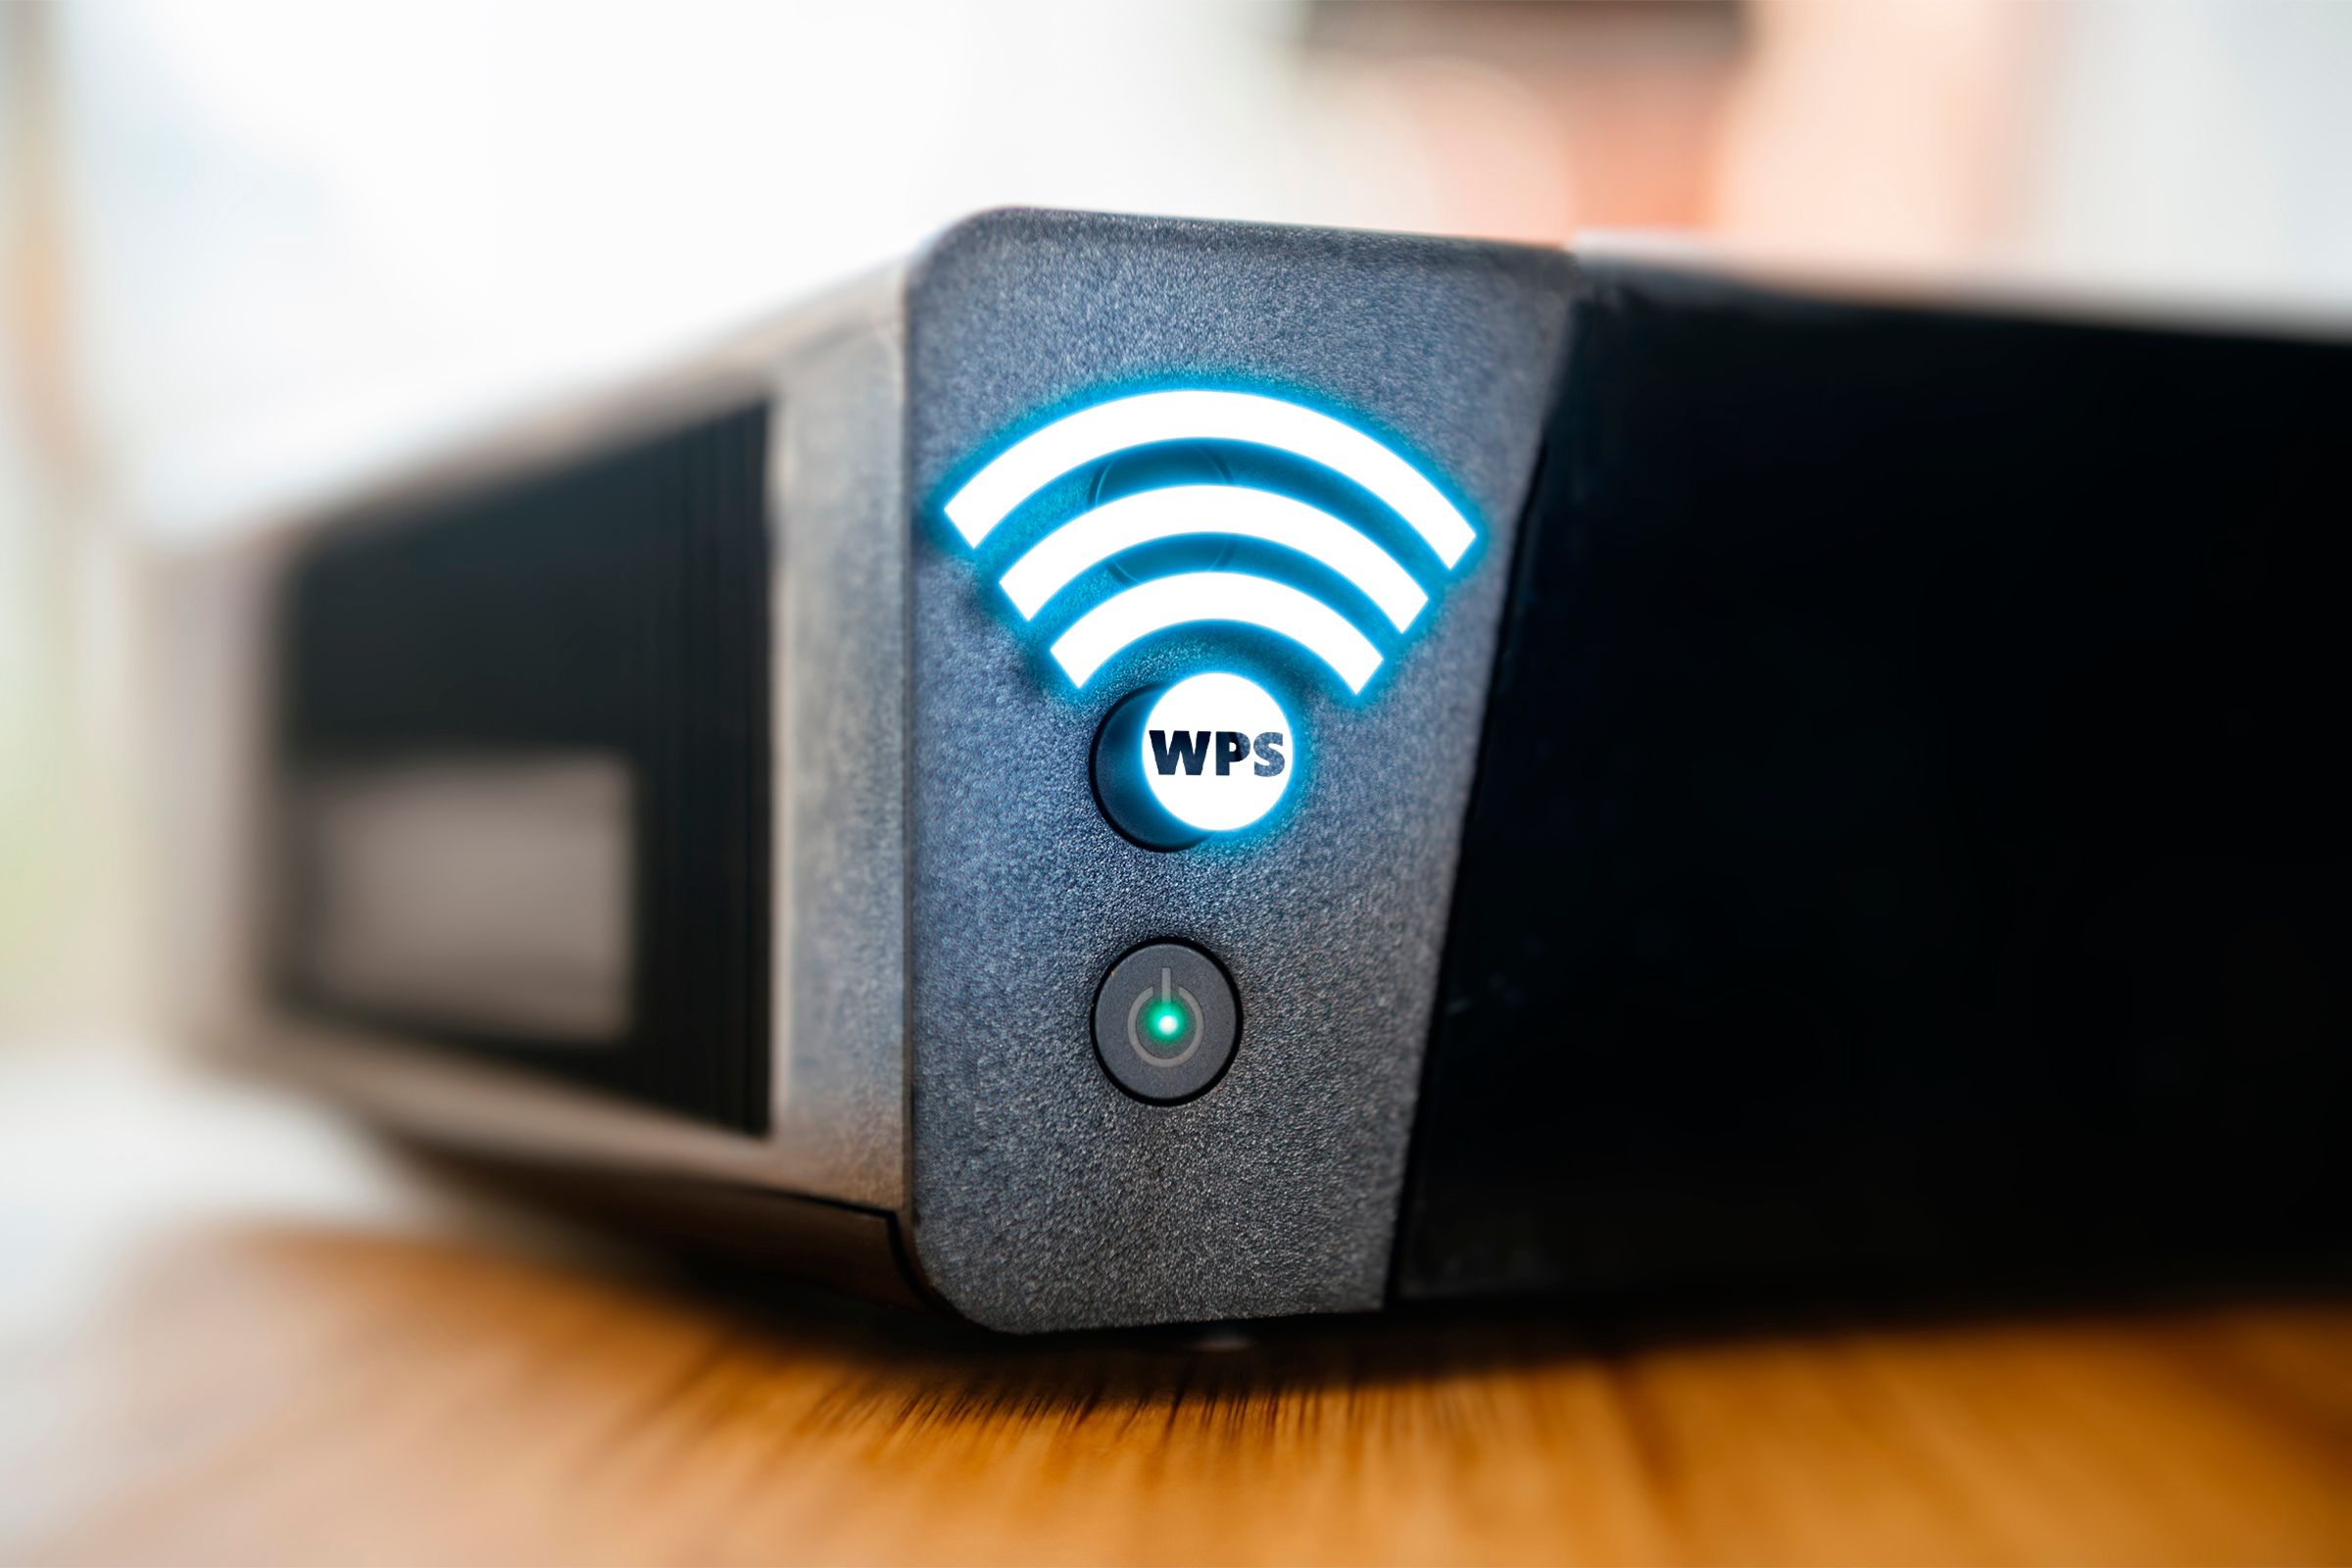 Device with the highlighted WPS button along with the Wi-Fi icon.